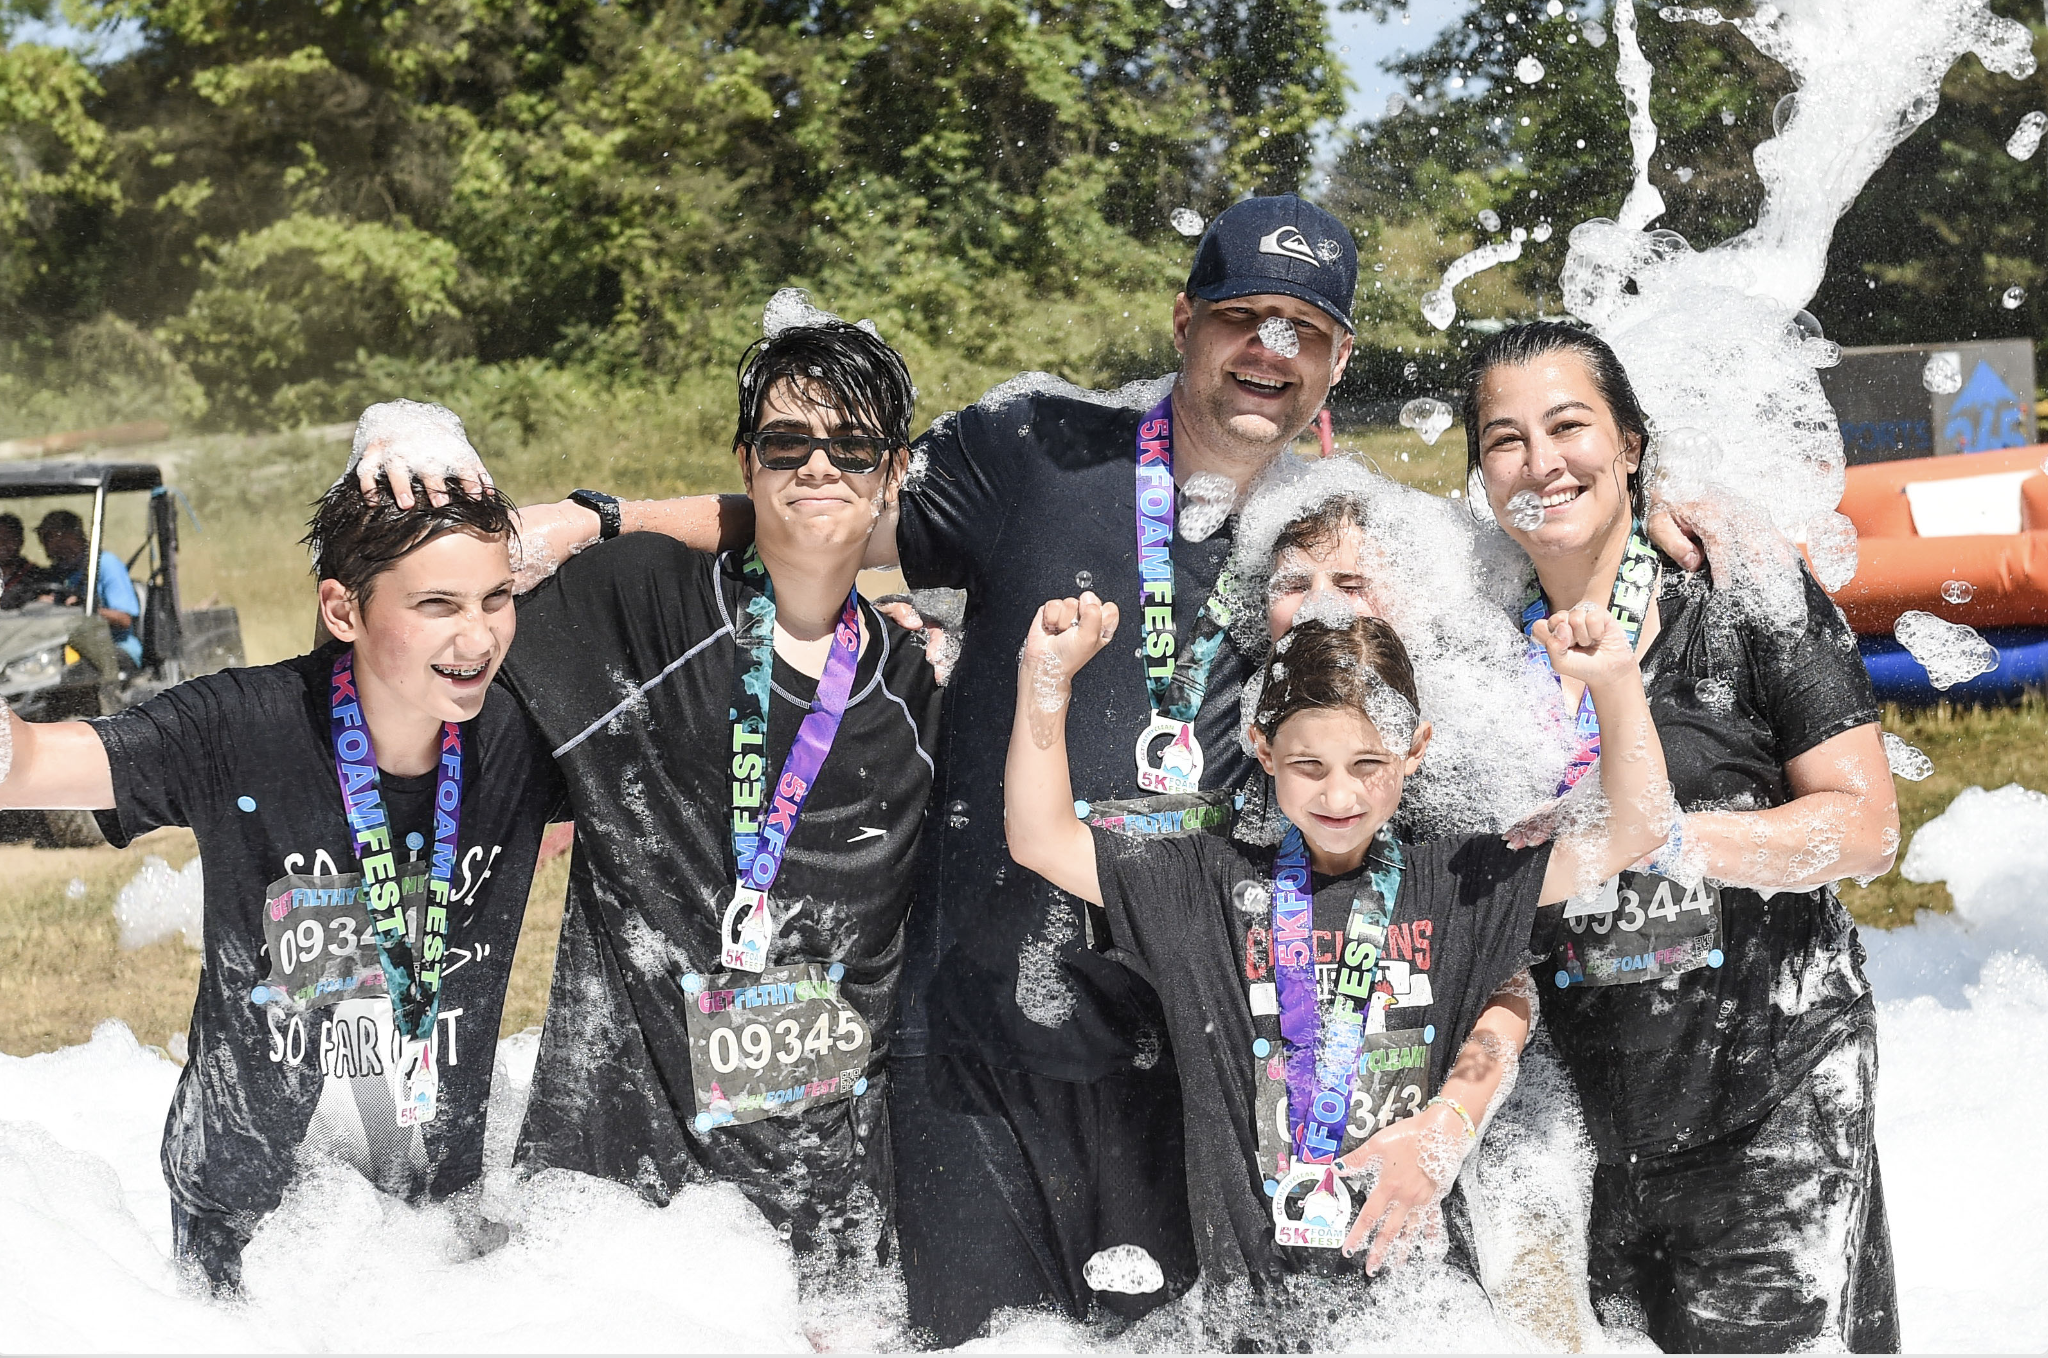 Power Yoga Canada and 5K Foam Fest Join Forces to Promote Health and Wellness